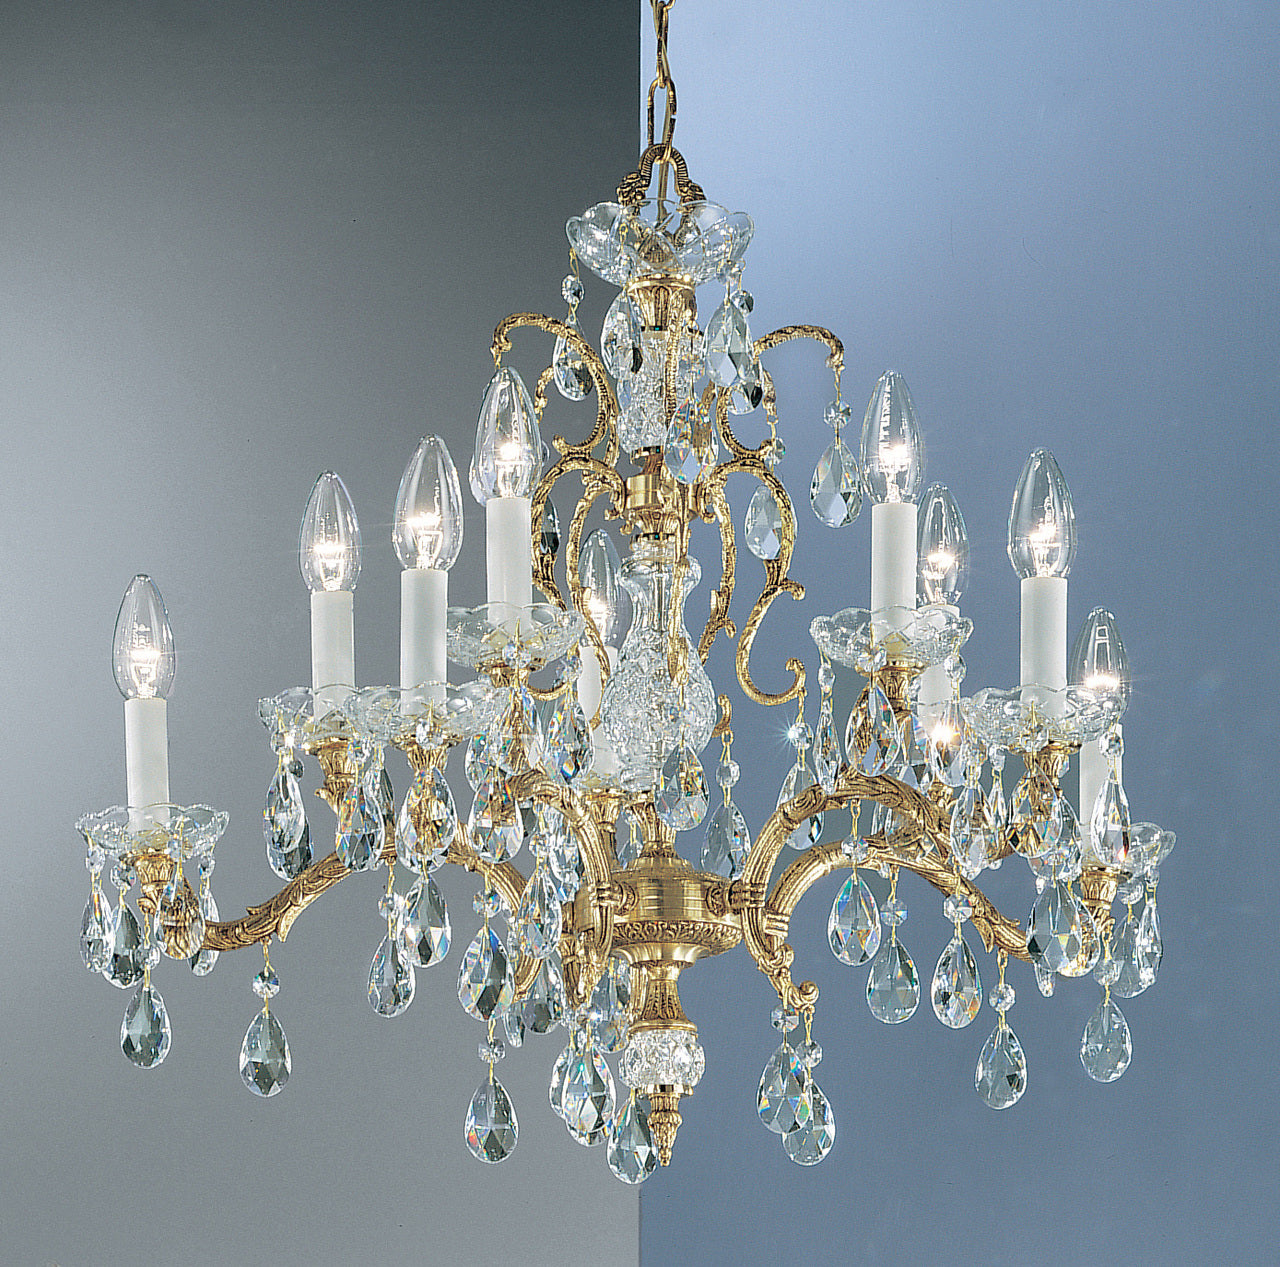 Classic Lighting 5530 OWB S Madrid Crystal/Cast Brass Chandelier in Olde World Bronze (Imported from Spain)